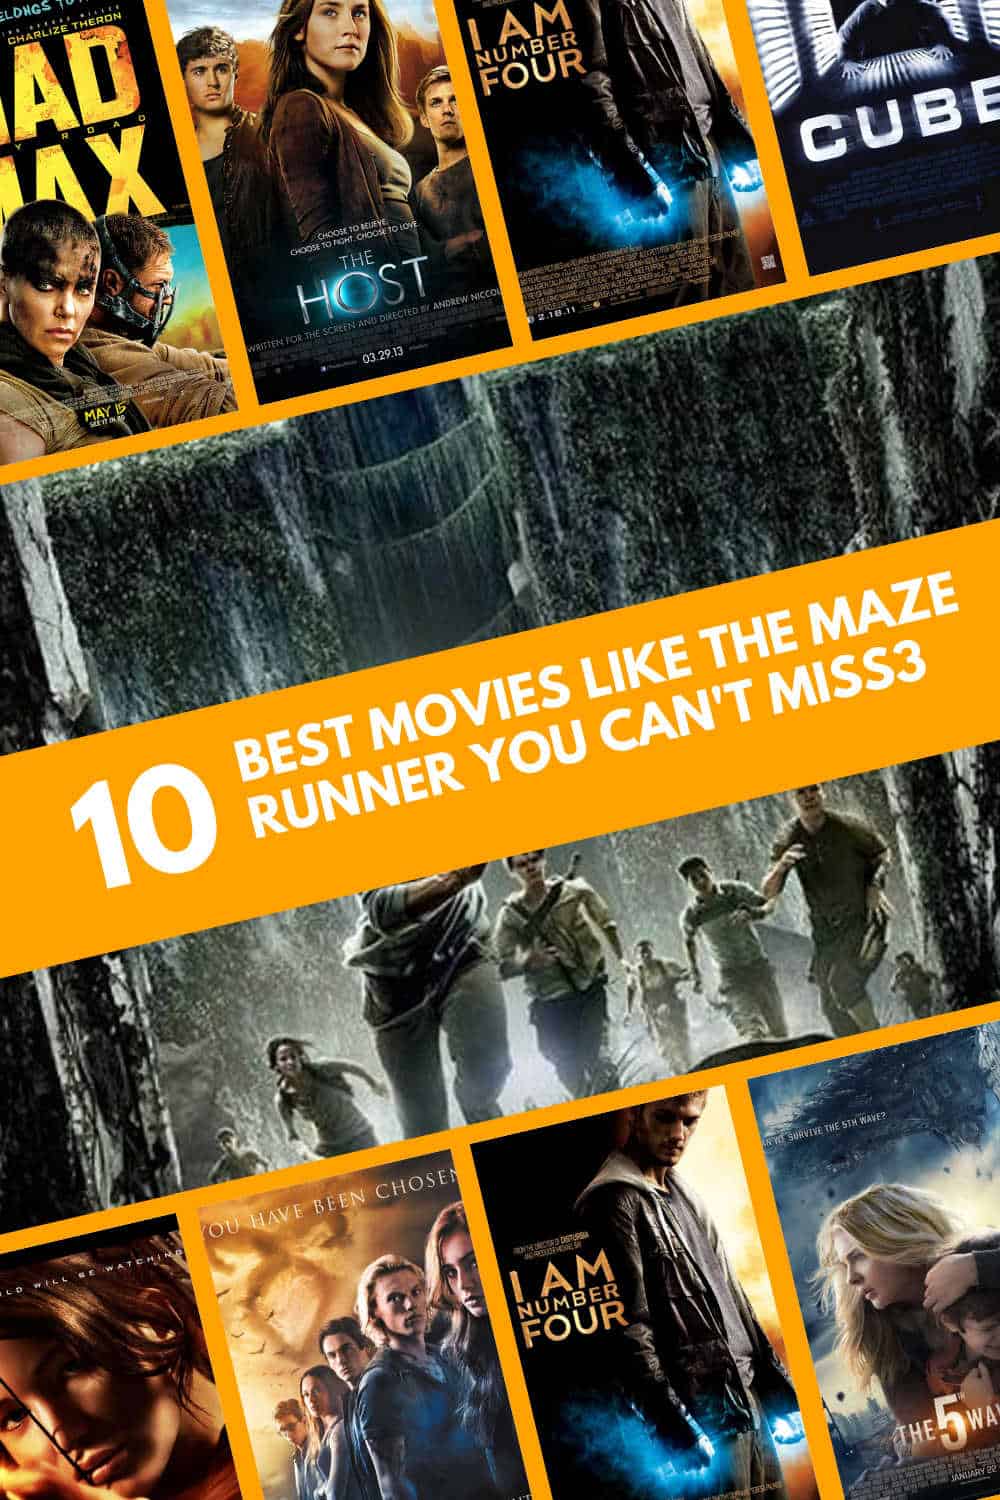 Movies Like The Maze Runner You Can't Miss3